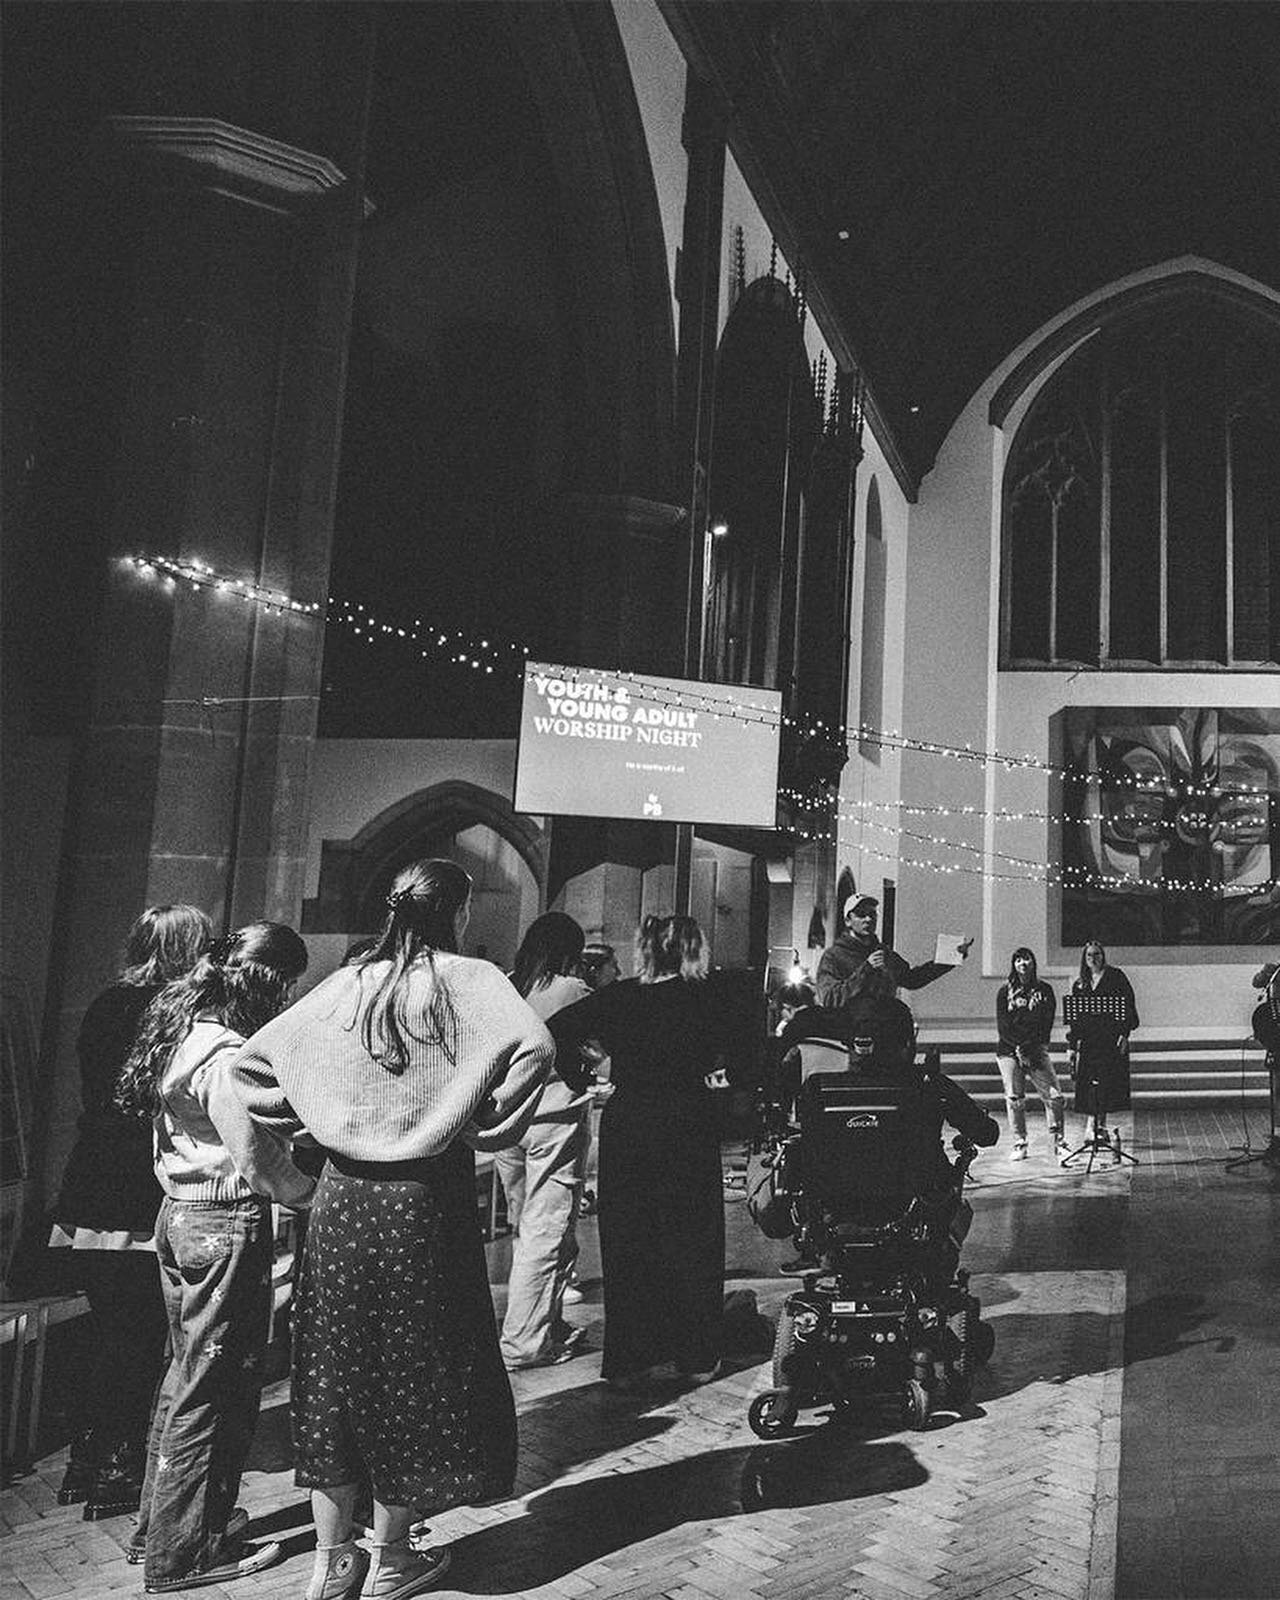 YOUTH &amp; YOUNG ADULT WORSHIP NIGHT 
.
.
Seeing Your face
Hearing Your voice
It&rsquo;s all I want to do
In this sacred space
In this sacred space
.
.
Last Friday was something special. We can&rsquo;t wait to gather together again to worship Jesus.